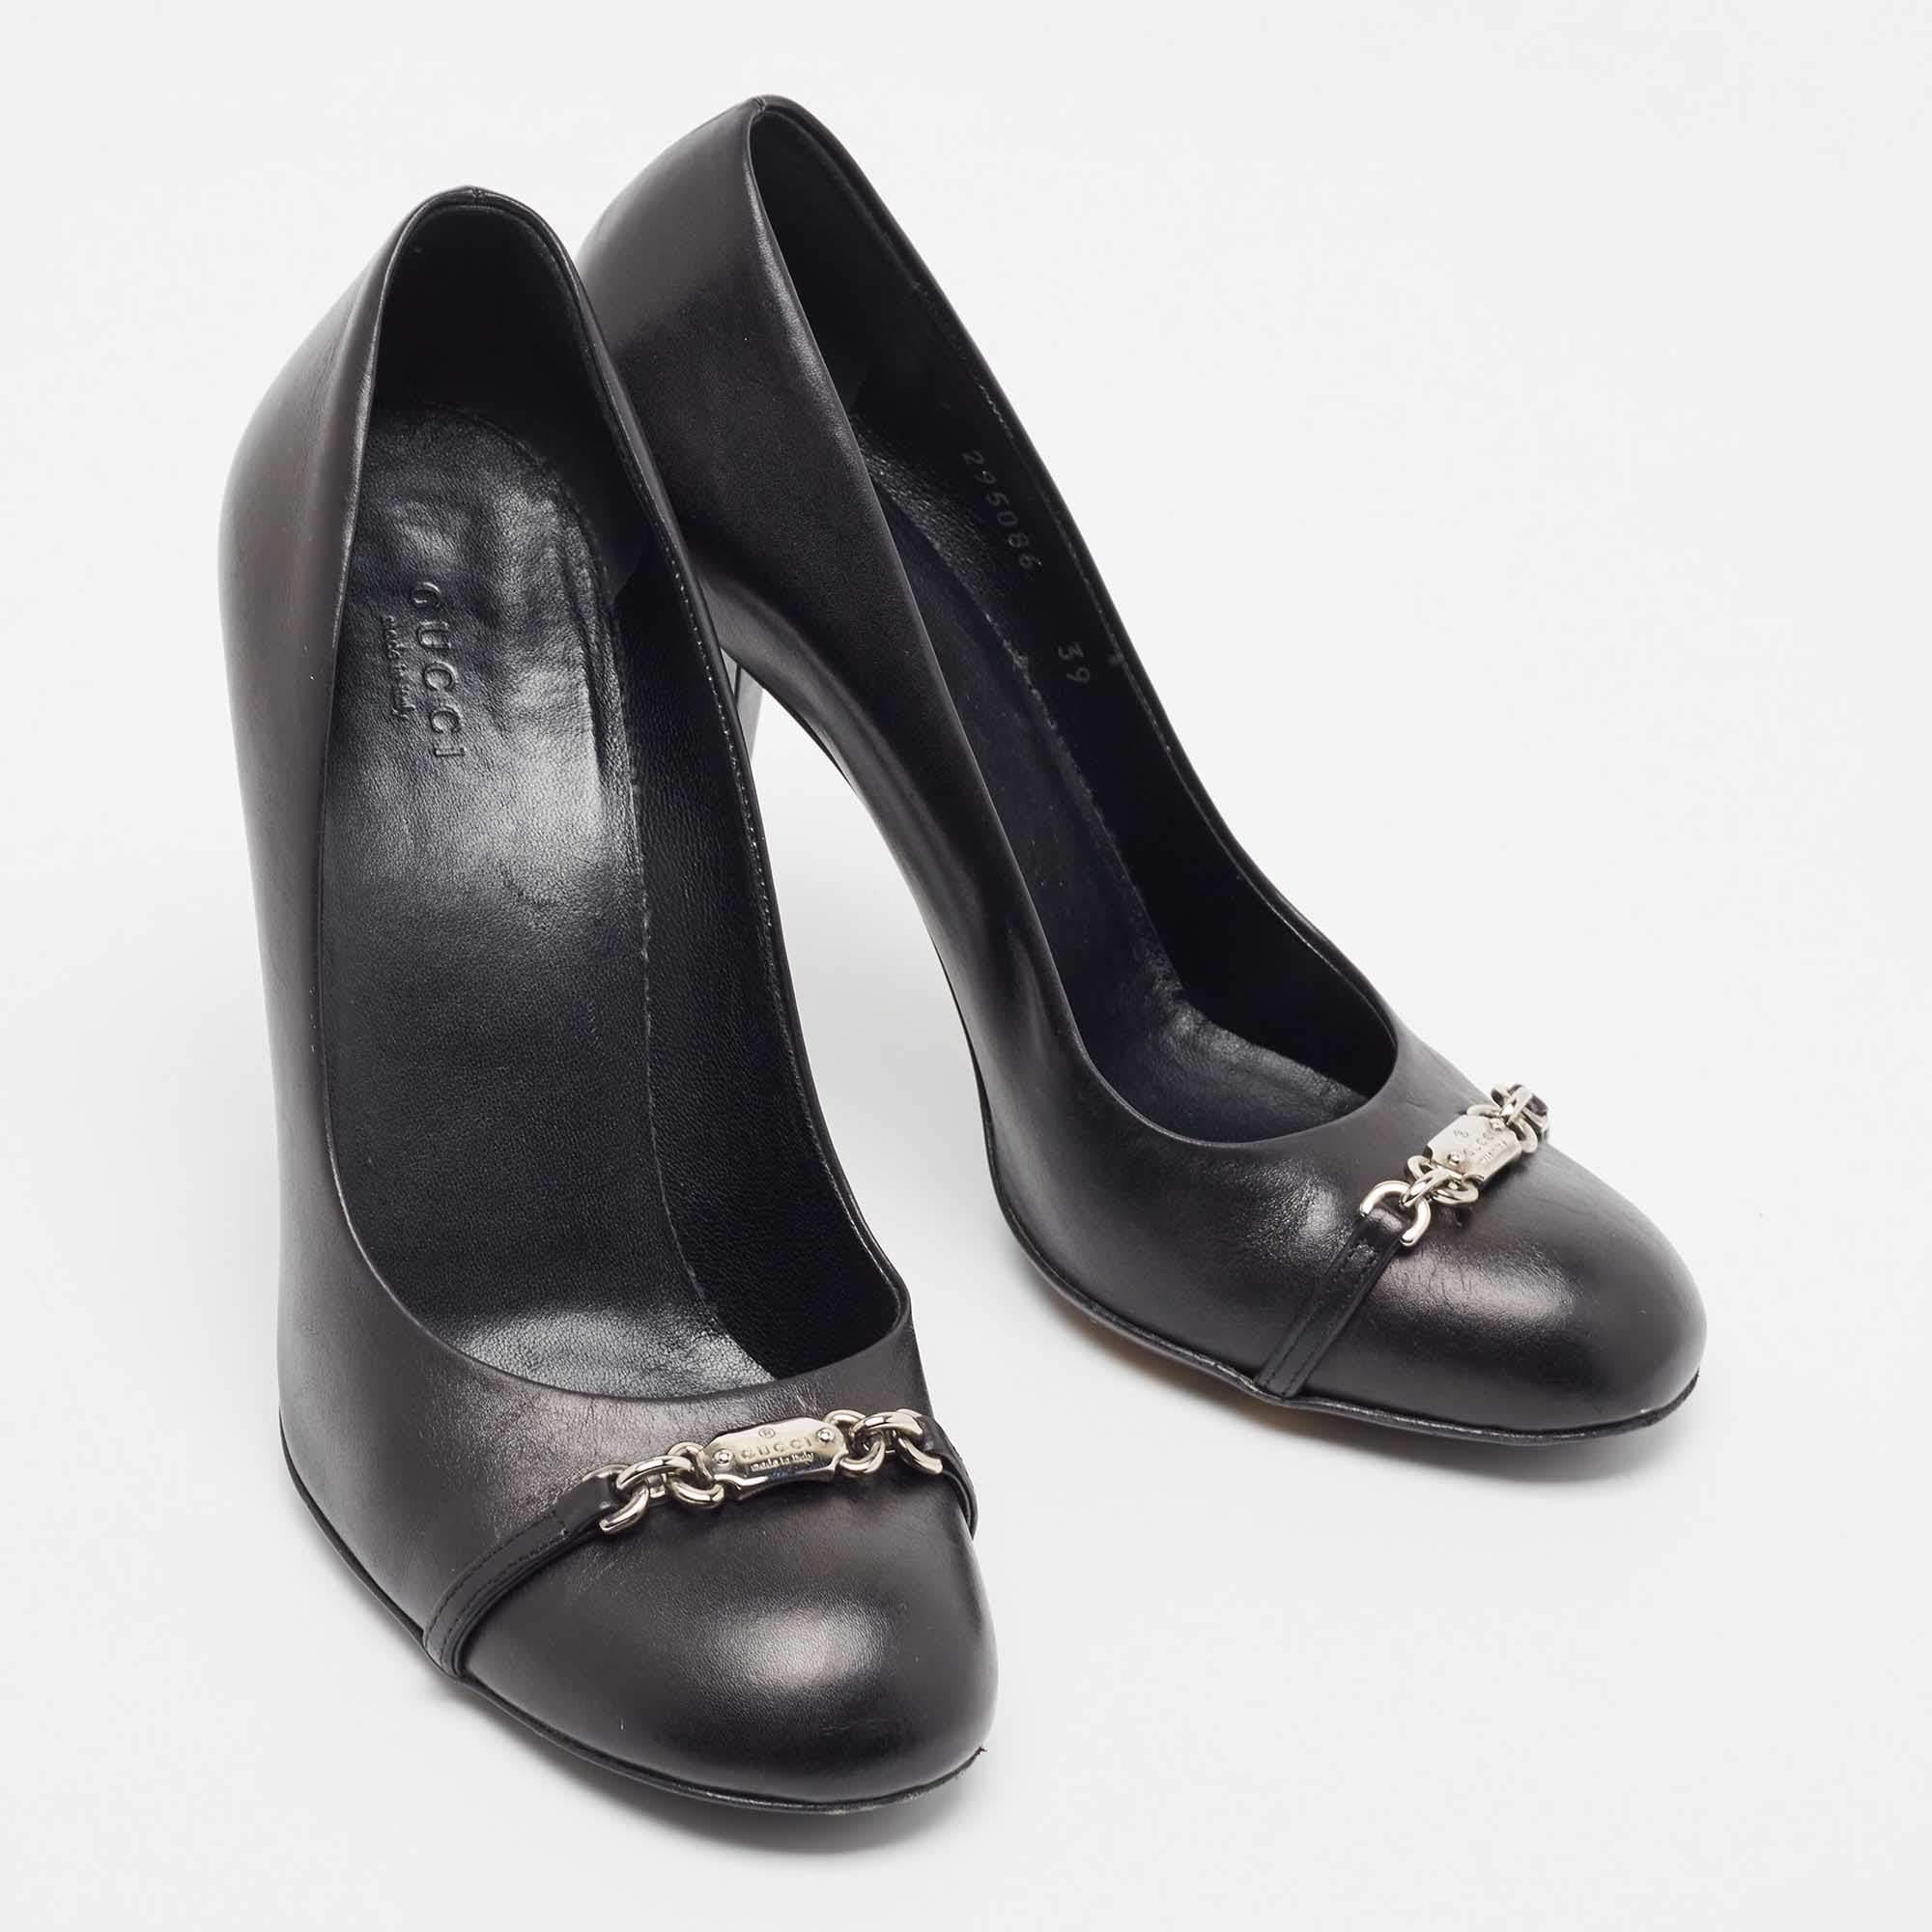 Gucci Black Leather Round Toe Pumps Size 39 For Sale 1